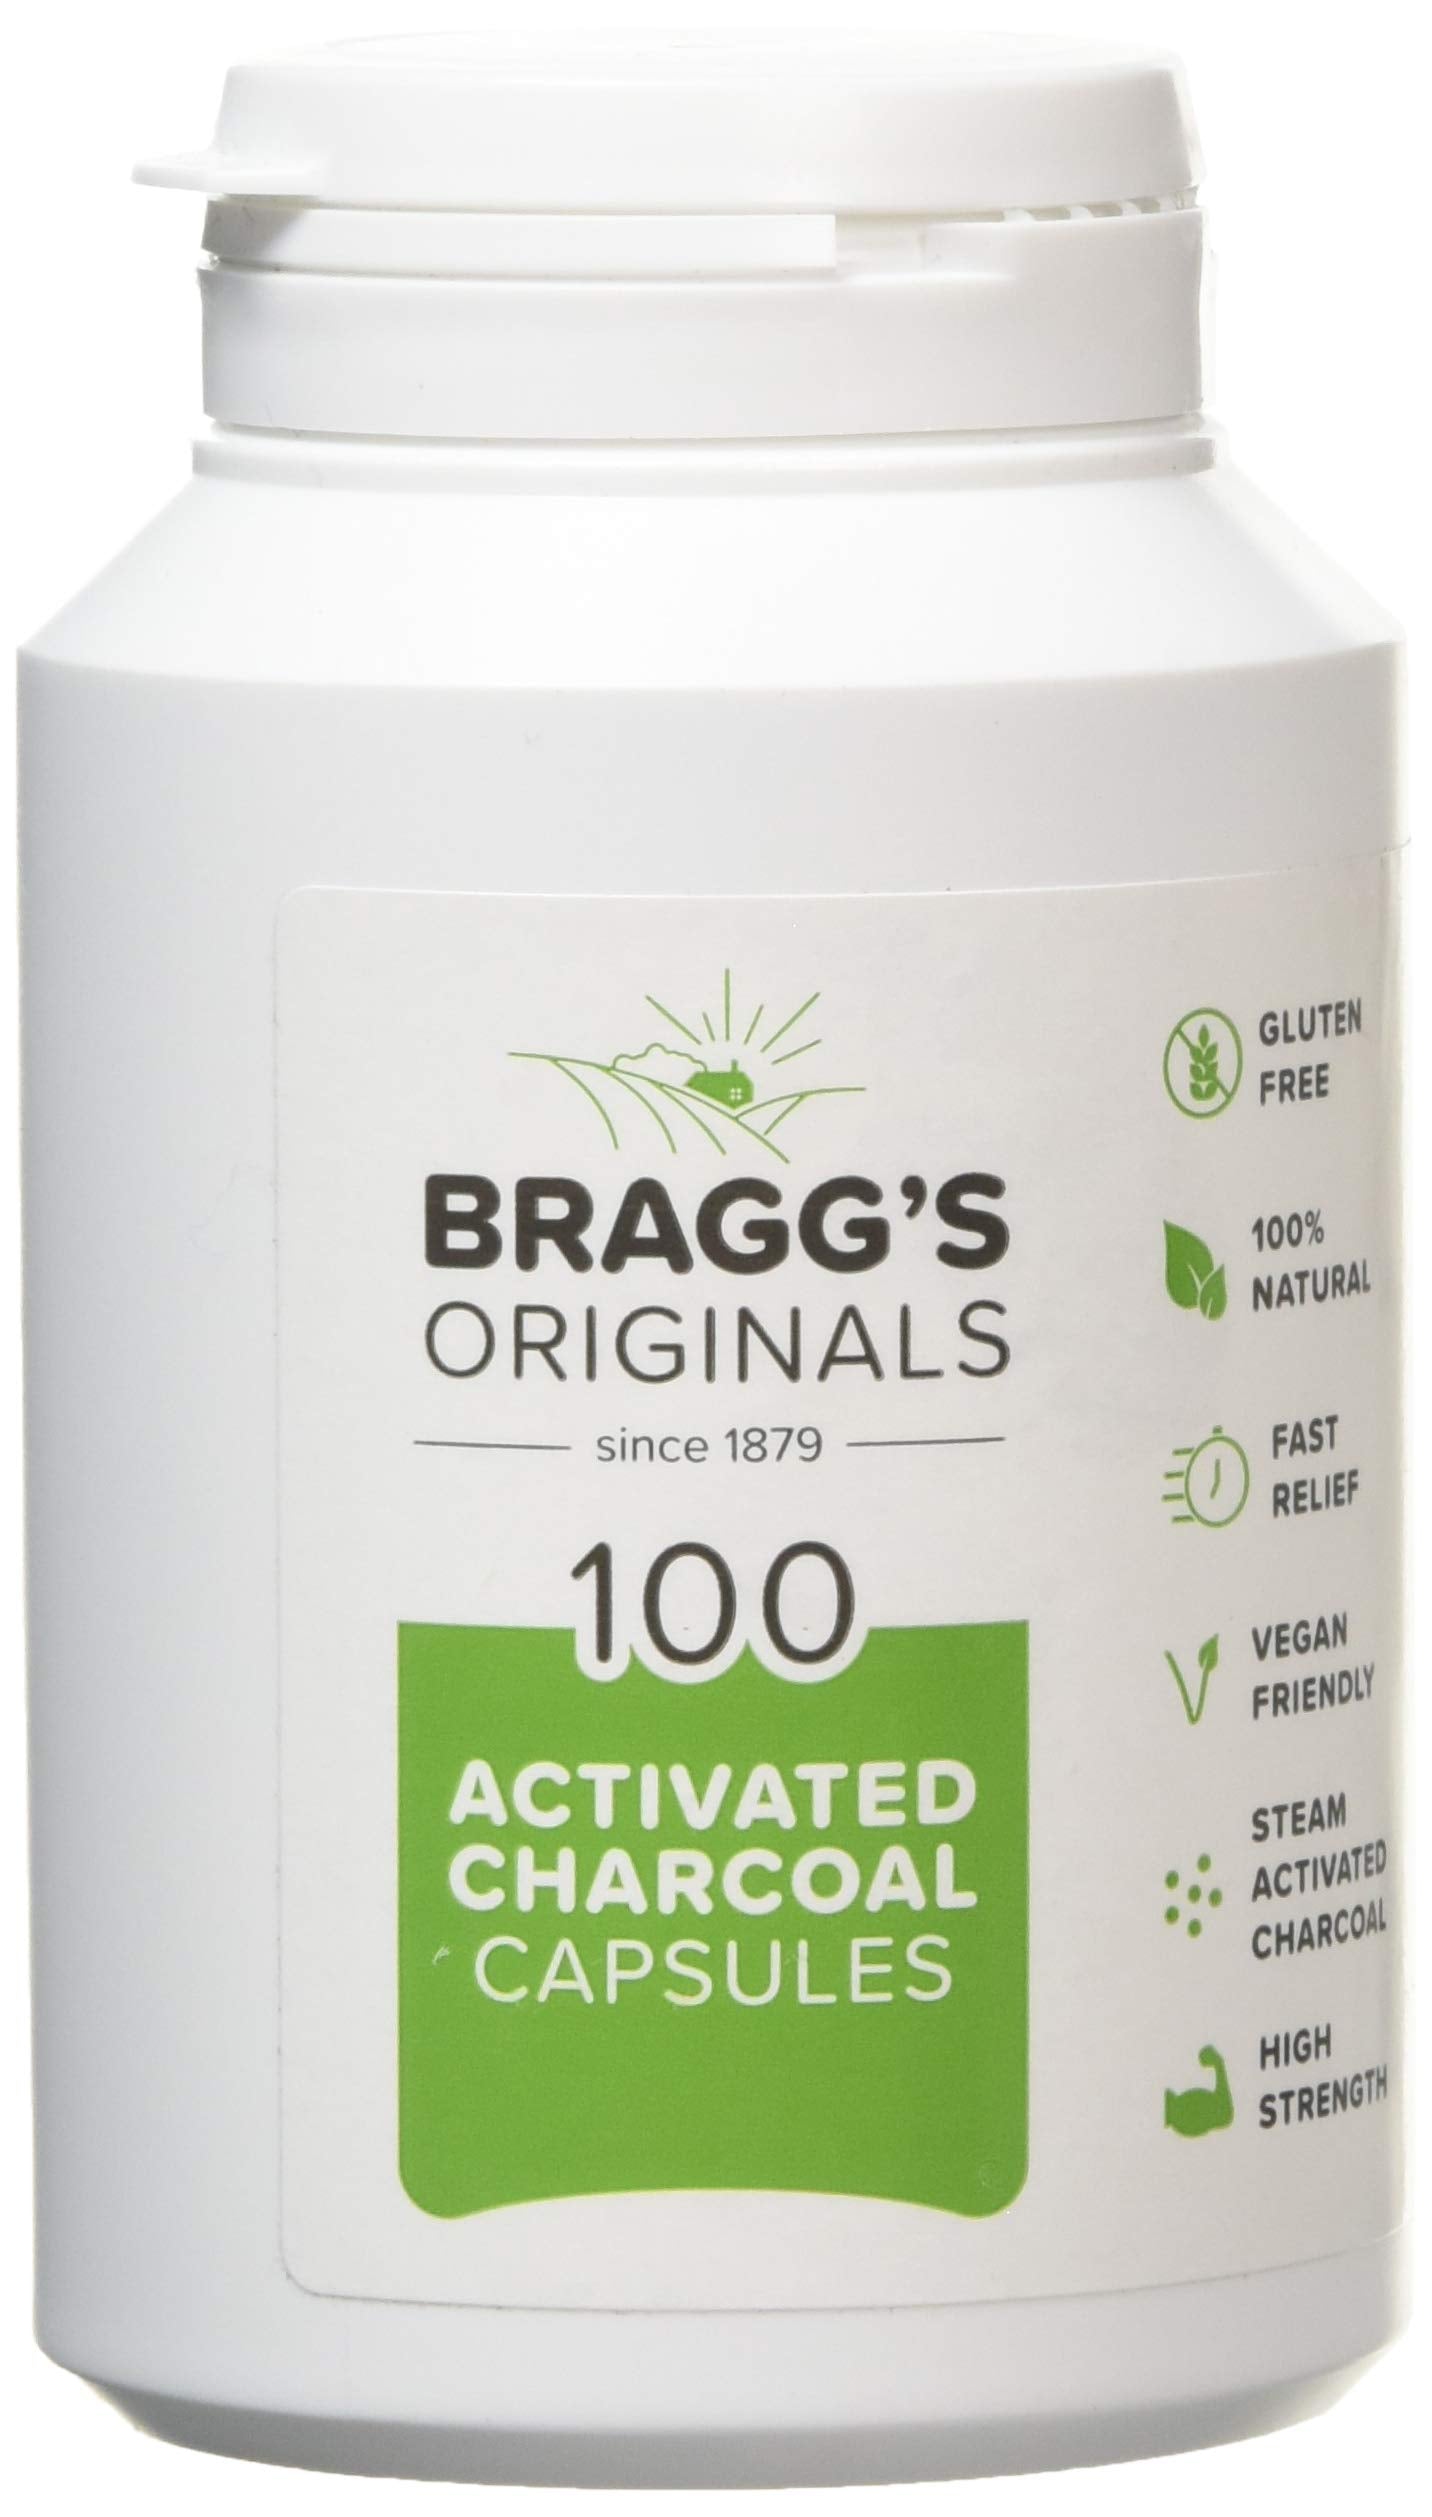 J.L Bragg's Vegetarian Activated Charcoal 100 Capsules